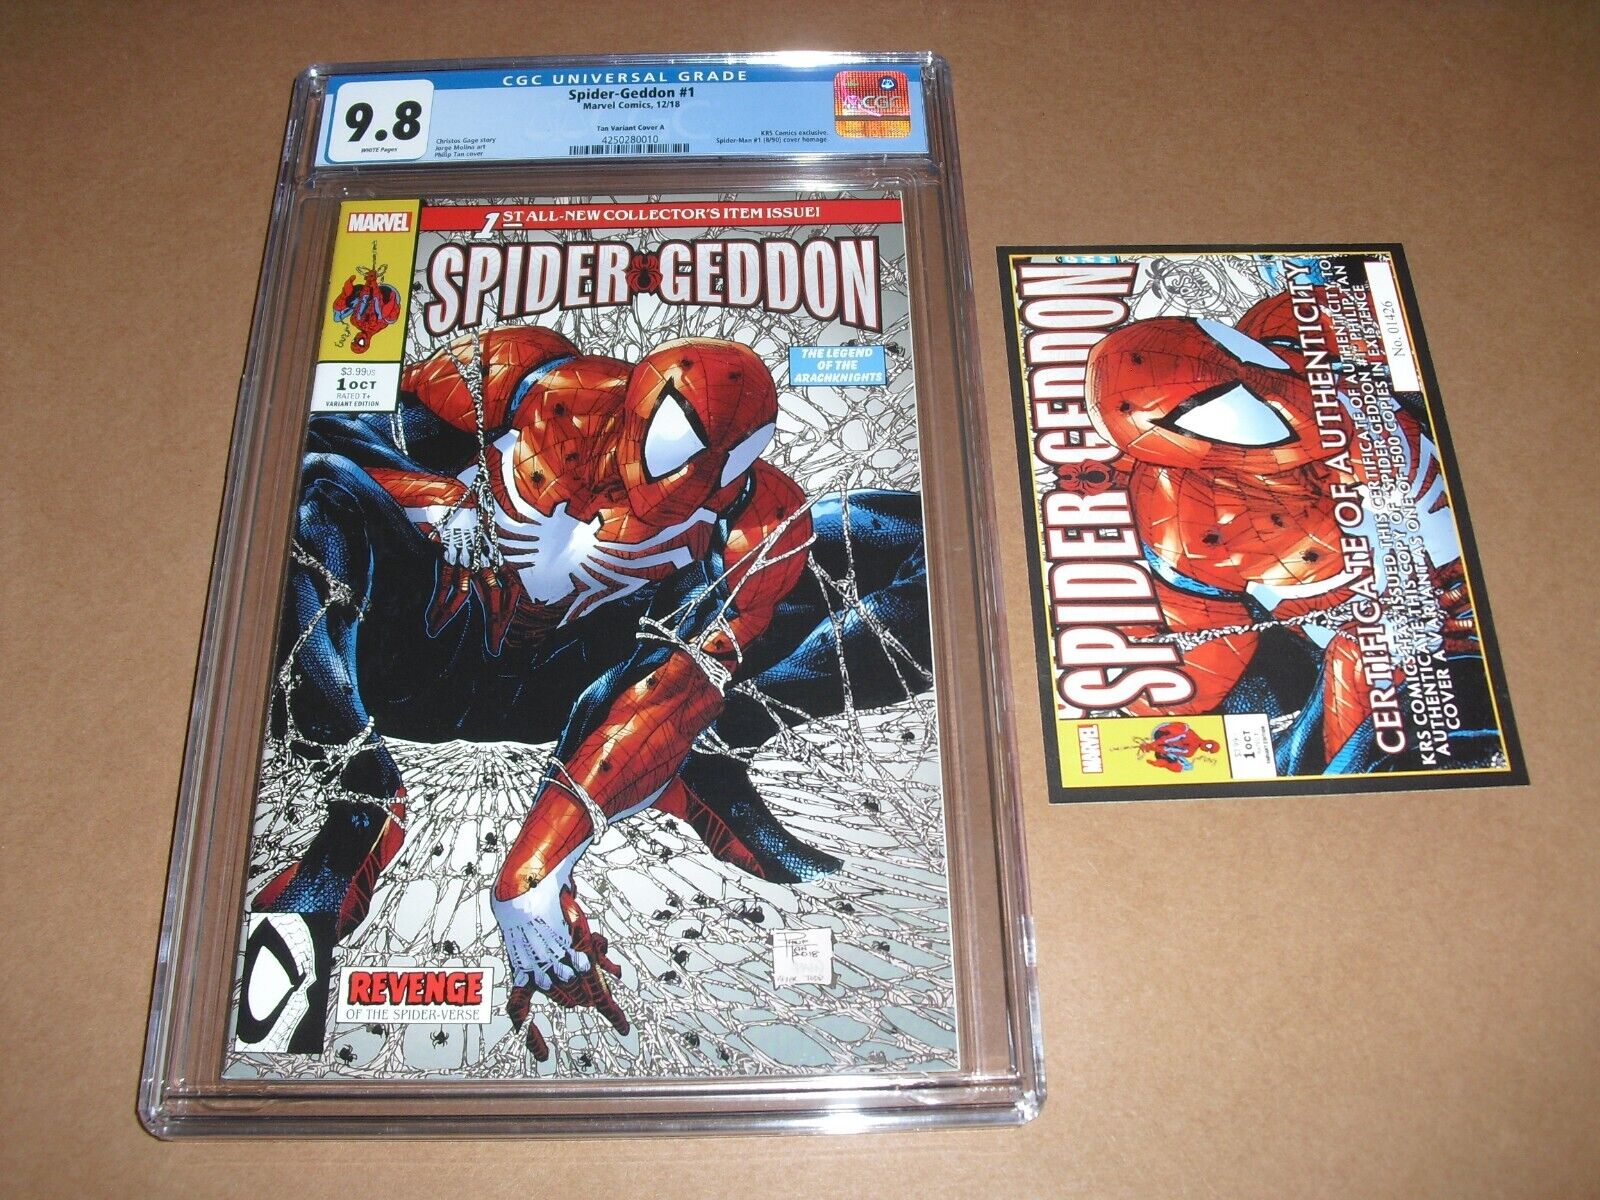 Spider-Geddon #1 CGC 9.8 Tan variant cover A from 2018 Marvel KRS Homage NM